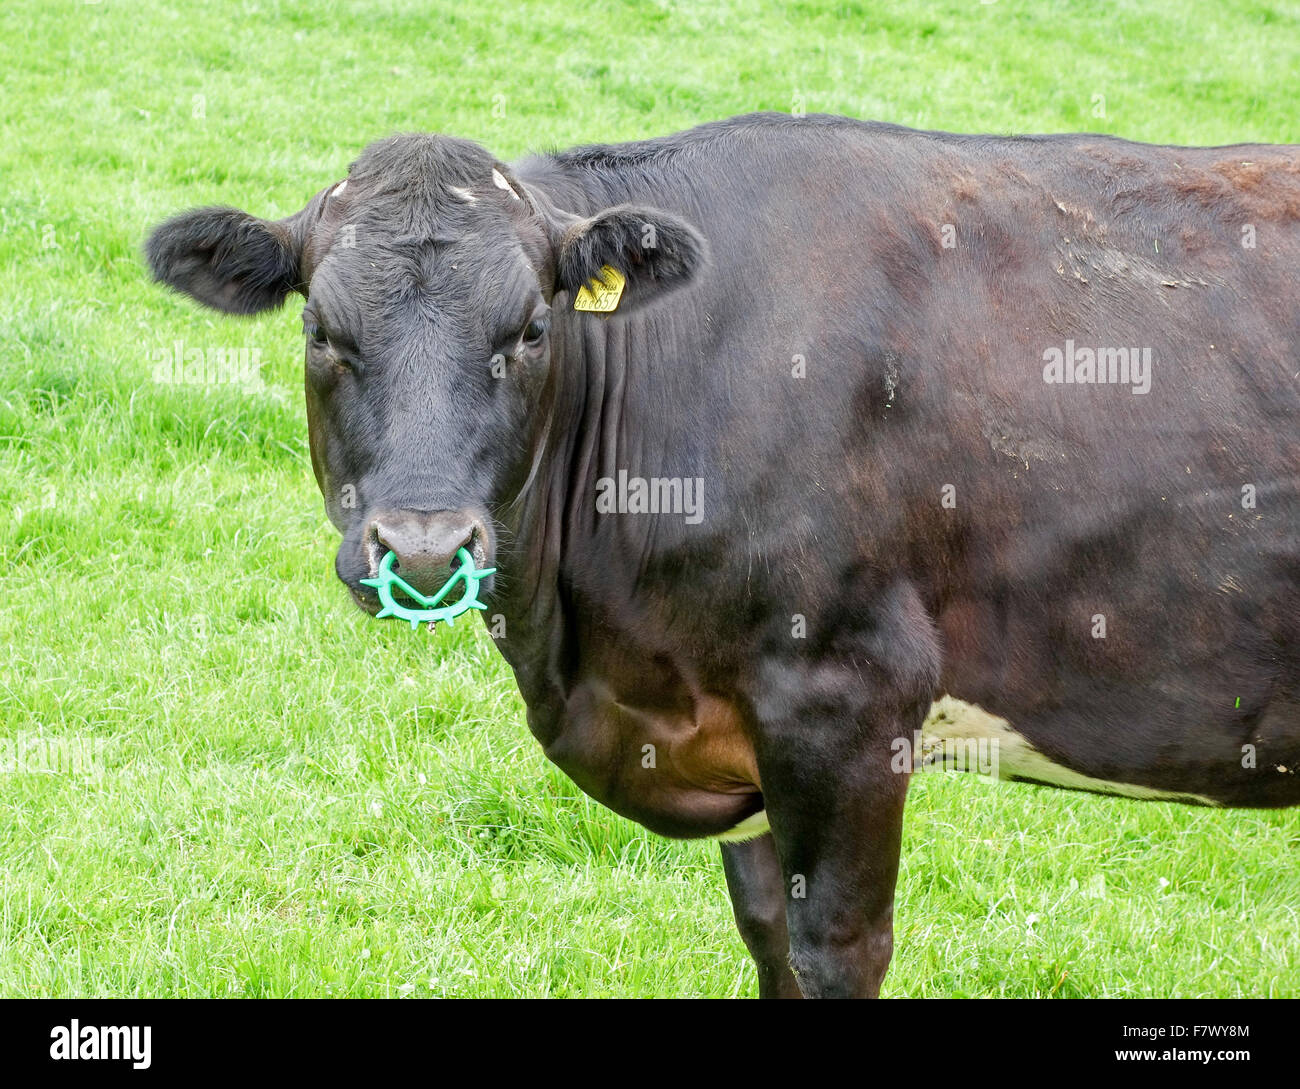 A calf wearing a Calf-weaning nose ring or noseband to stop the cow from suckling her mother Stock Photo